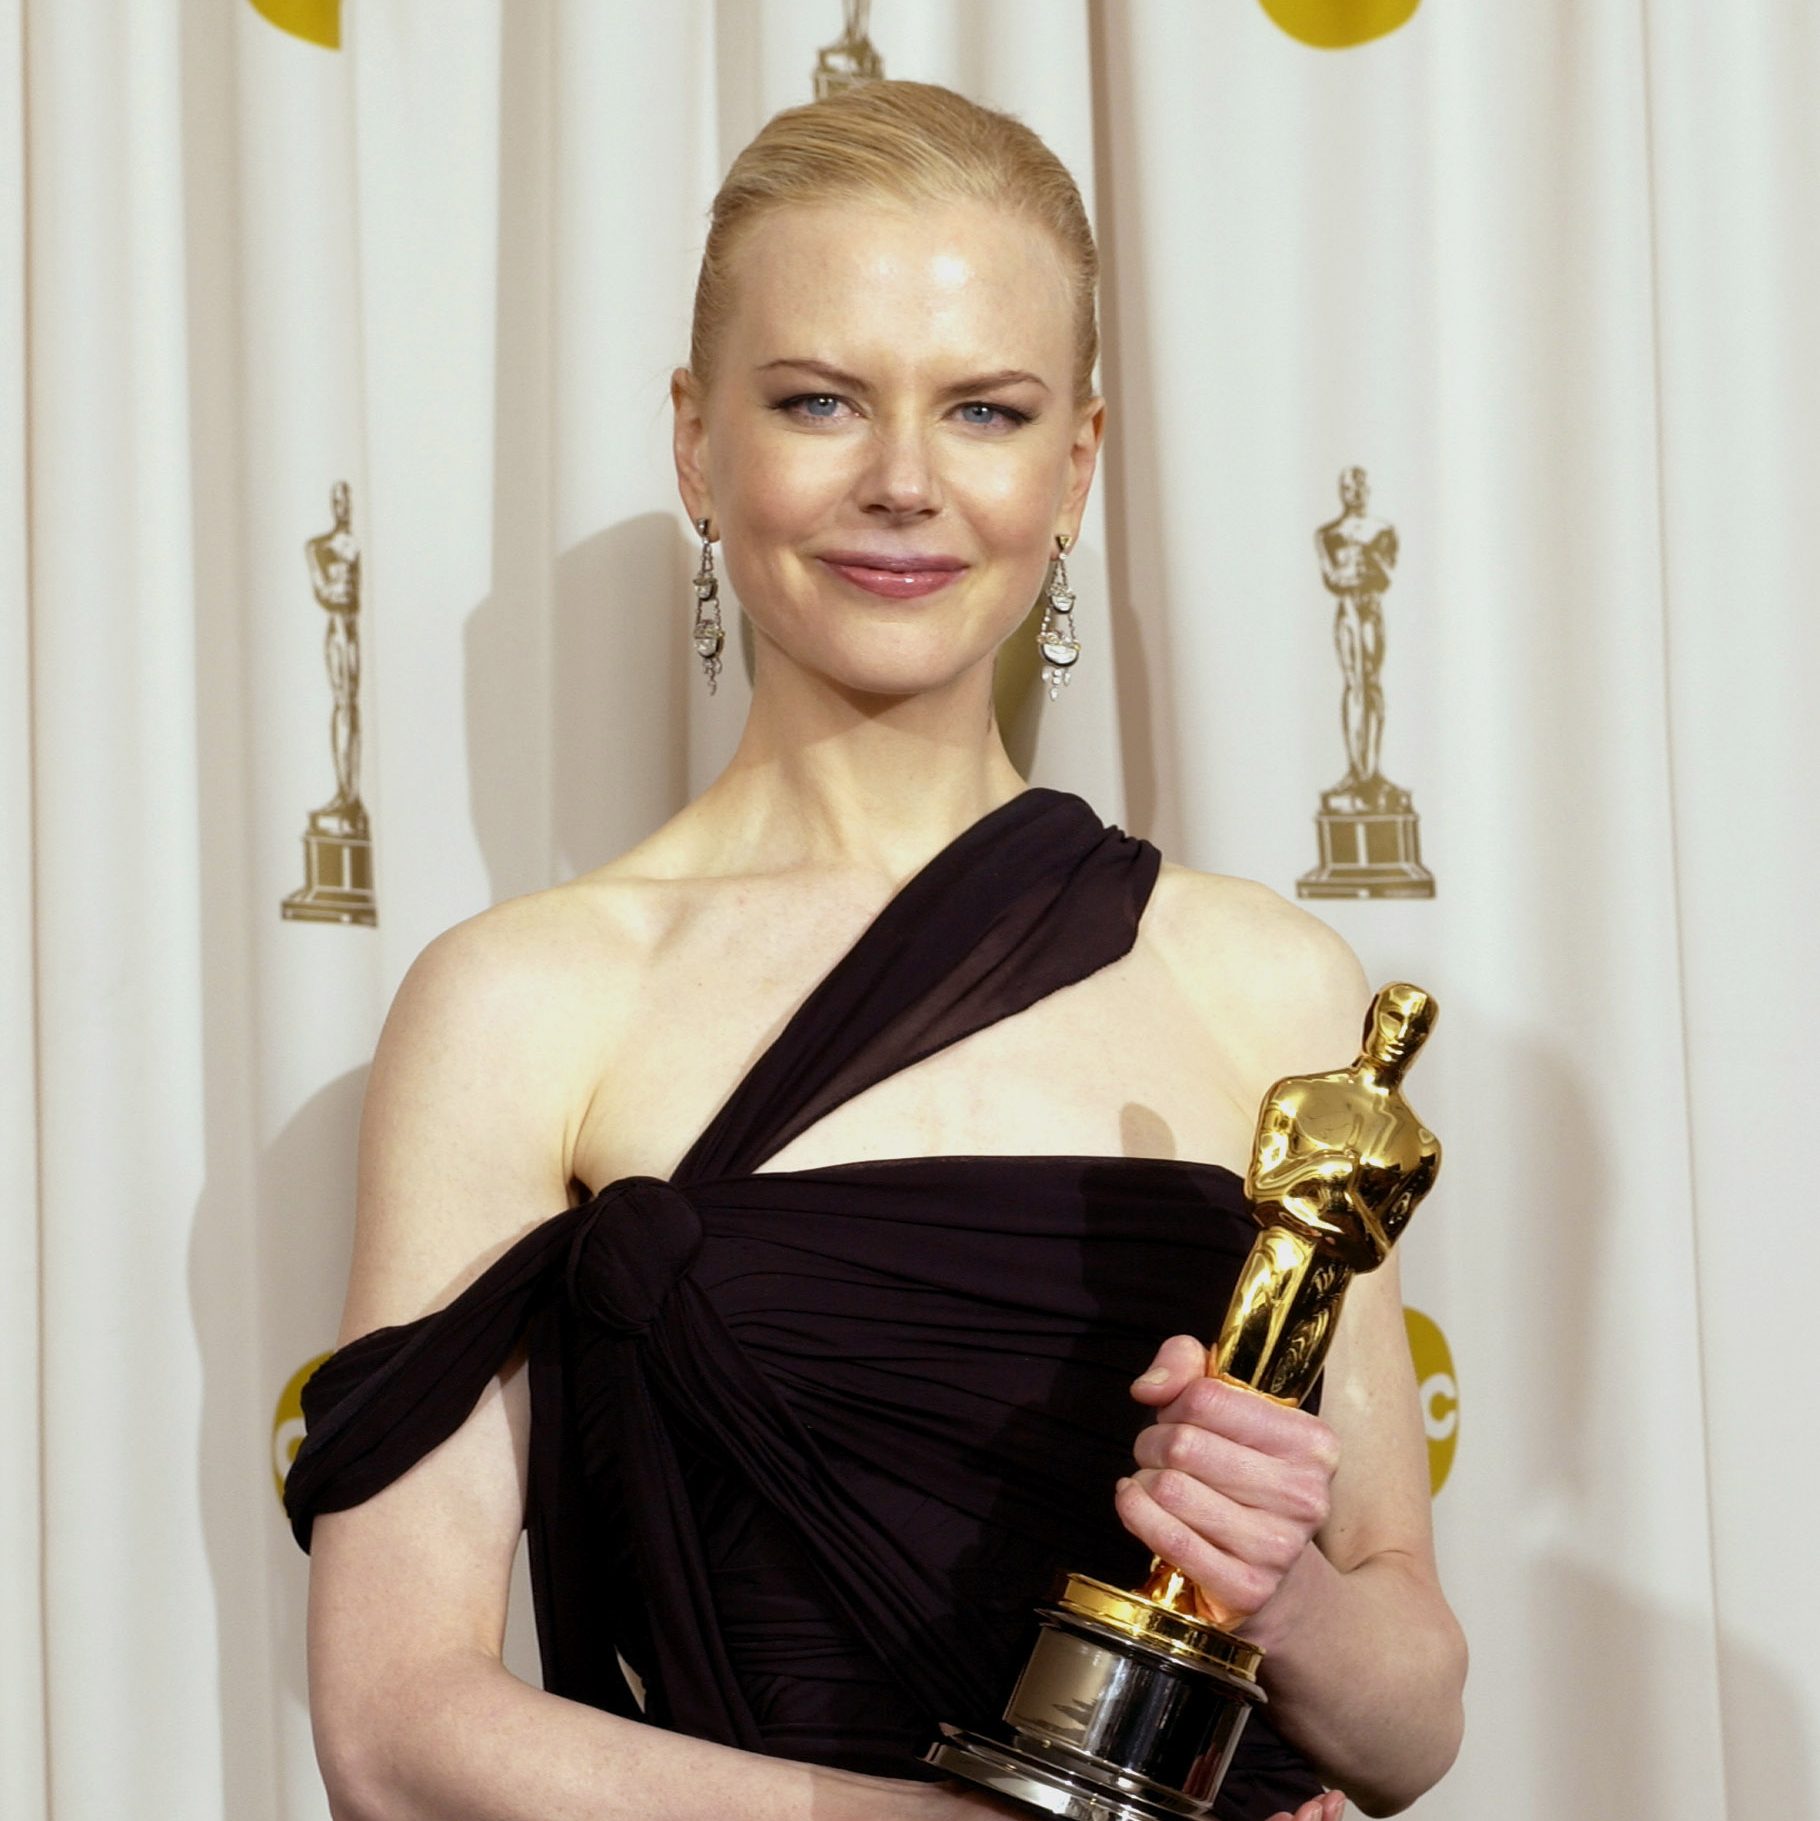 Nicole Kidman wins the Oscar for Best Actress for her work in The Hours, 2003 